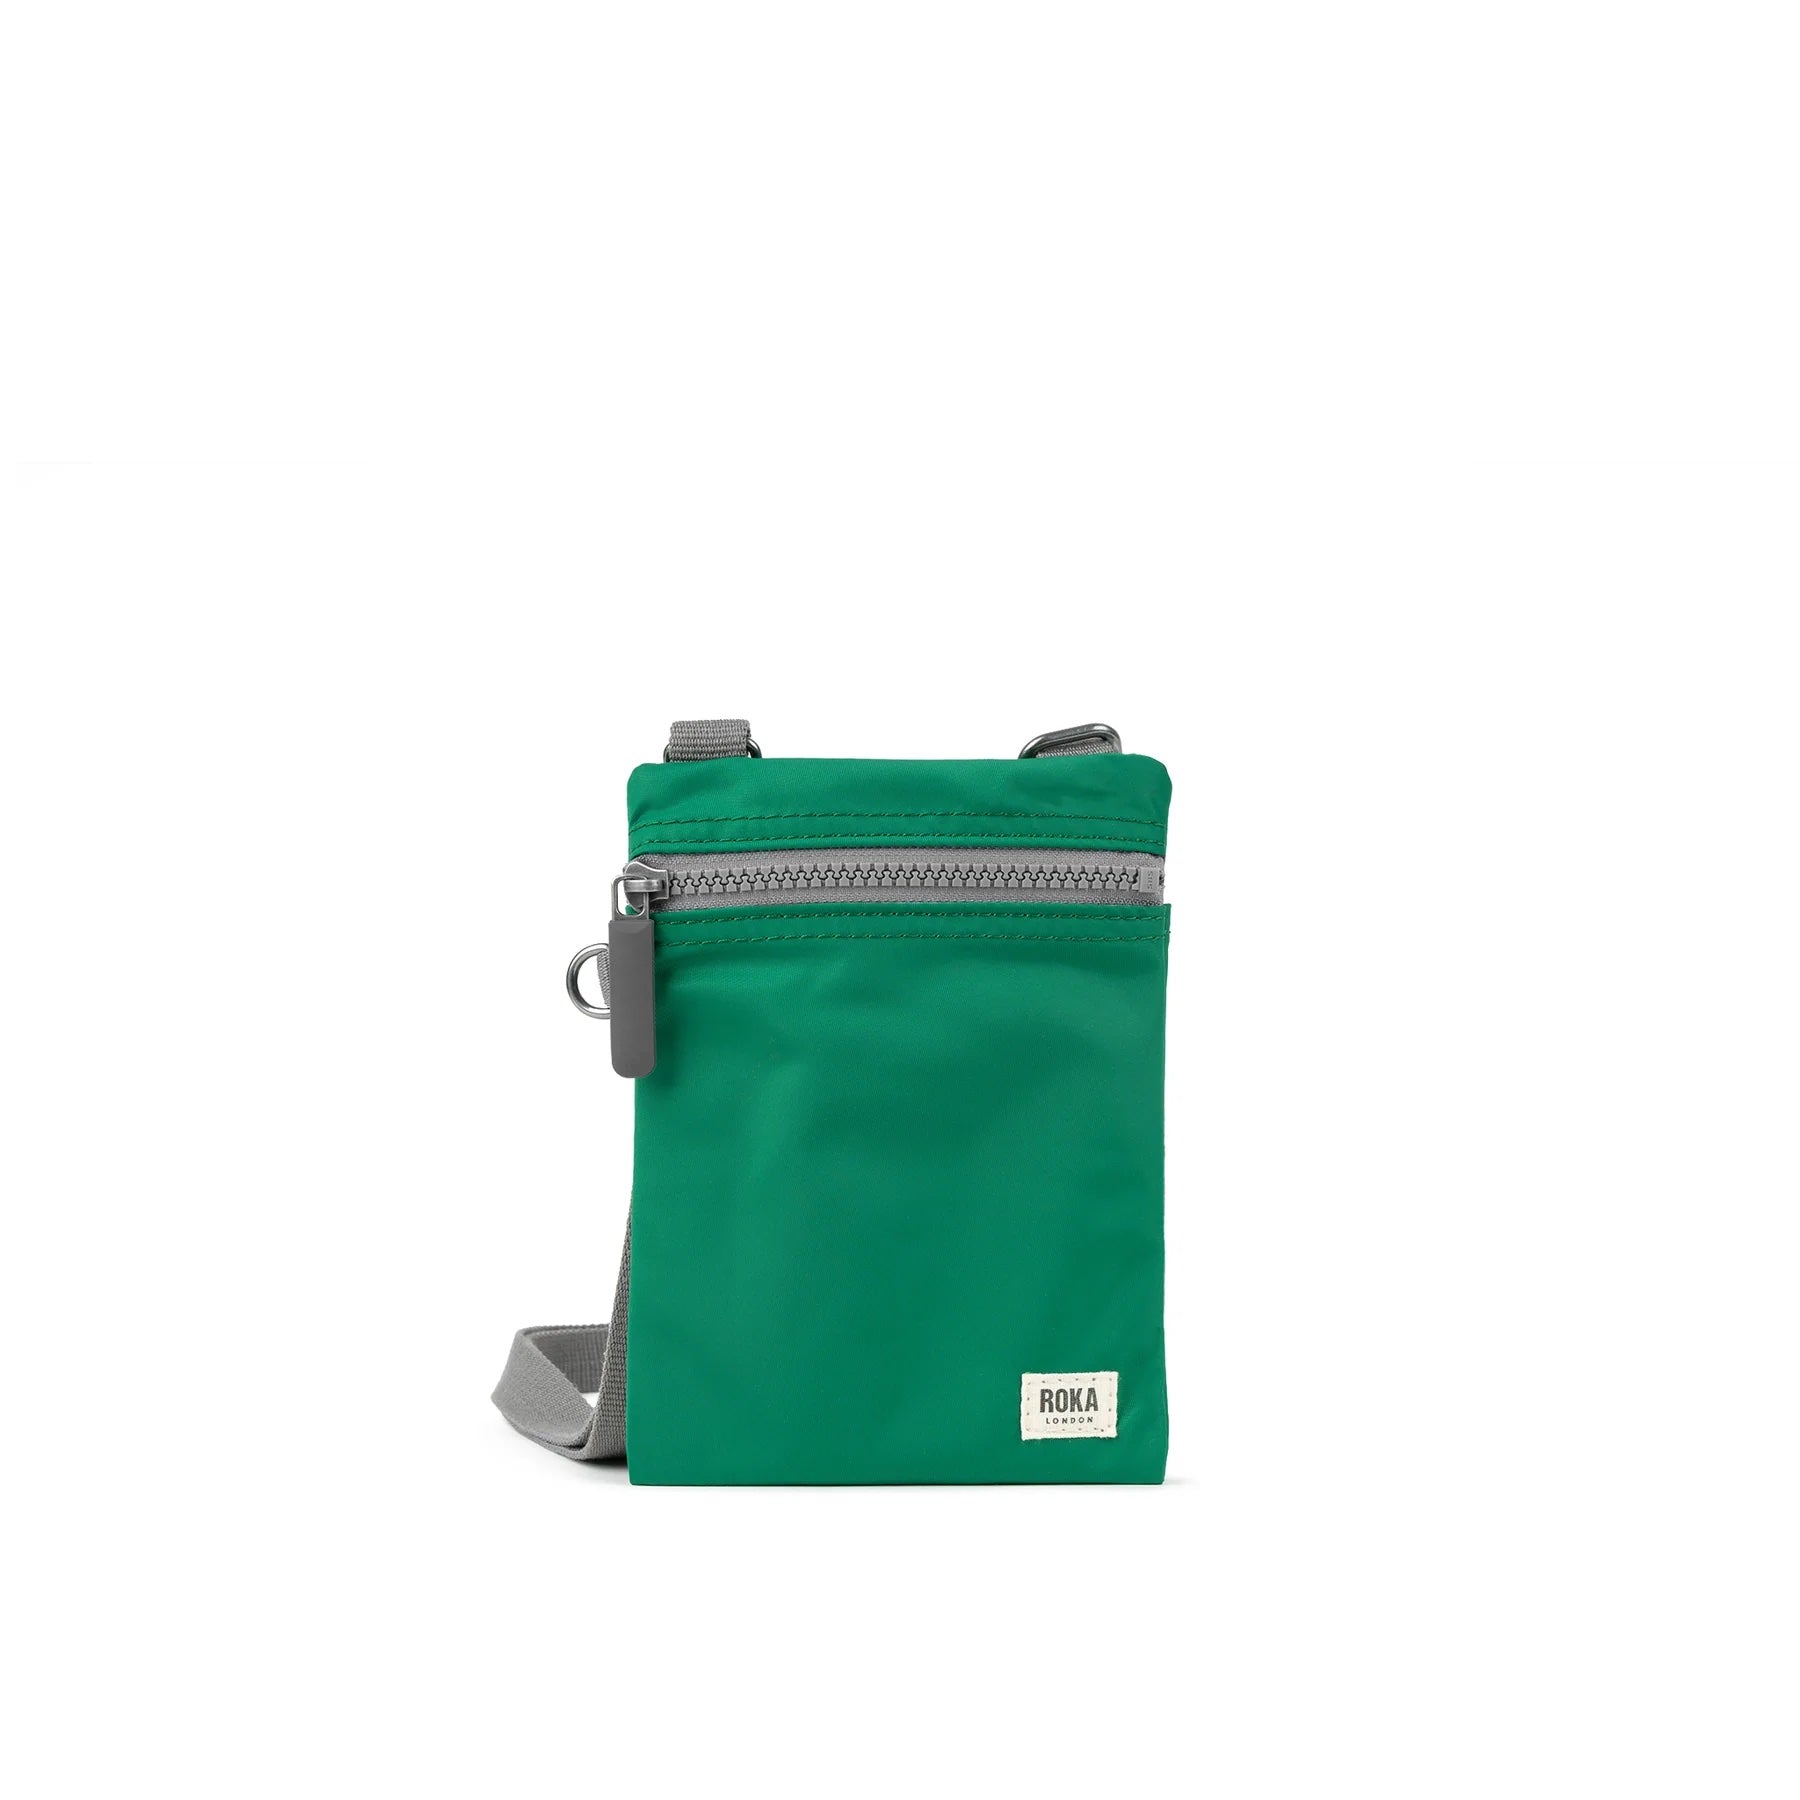 A photo of the front of a small rectangular emerald green pocket bag. It has a grey zip horizontally at the top, grey straps, and a small ROKA logo in the bottom right corner.